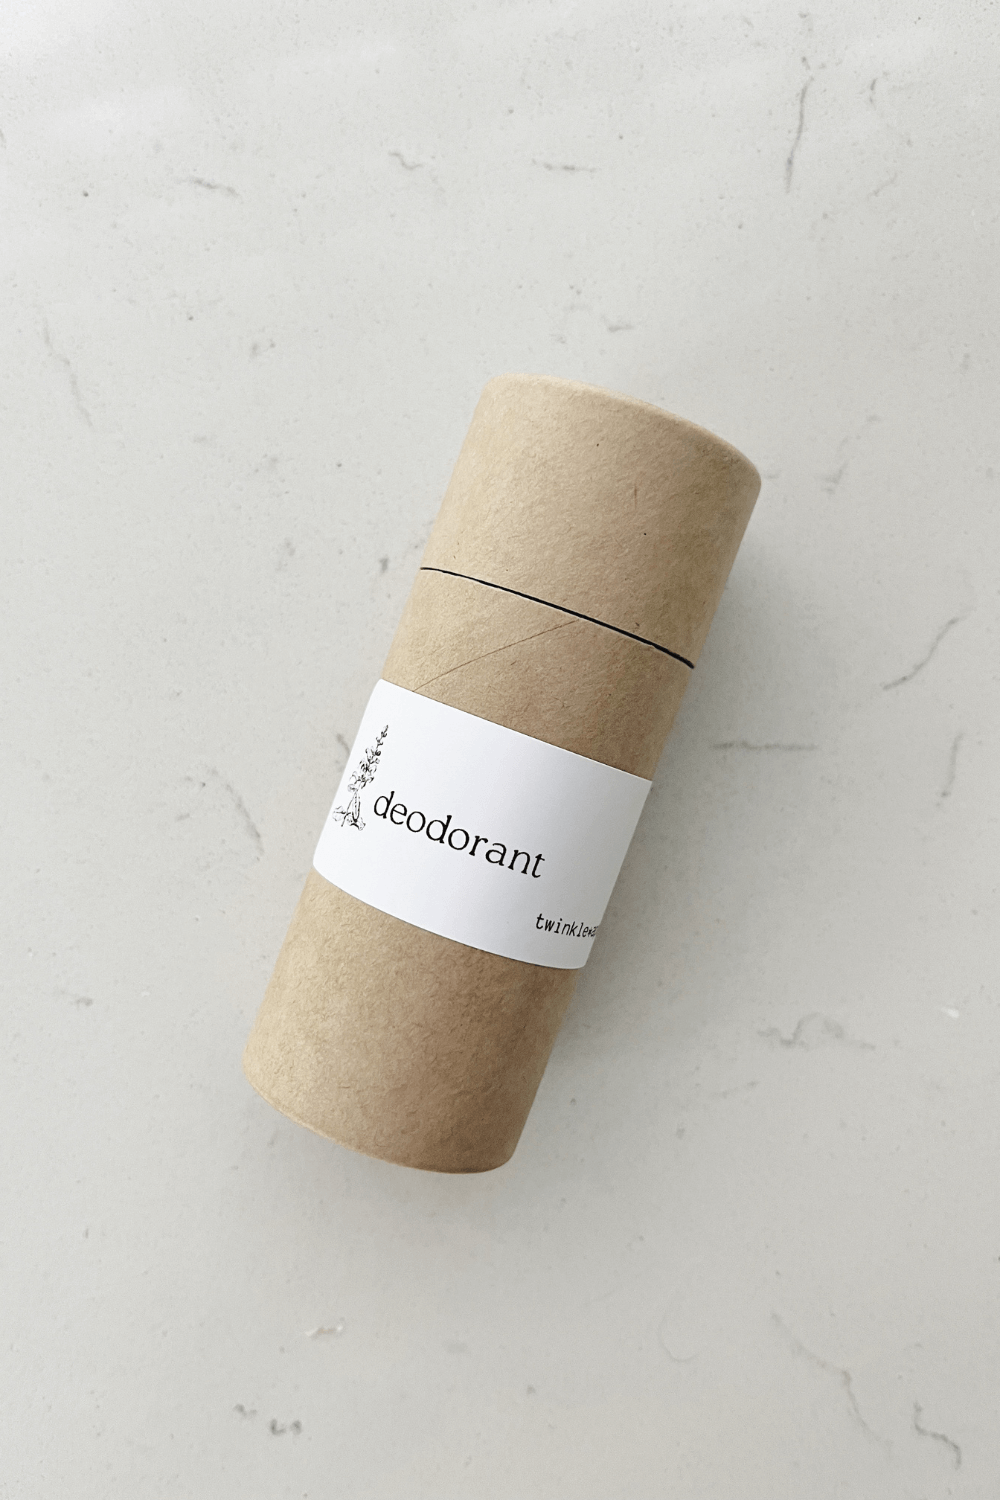 natural vegan deodorant in a 2.7 oz biodegradable paper tube by twinkle apothecary 